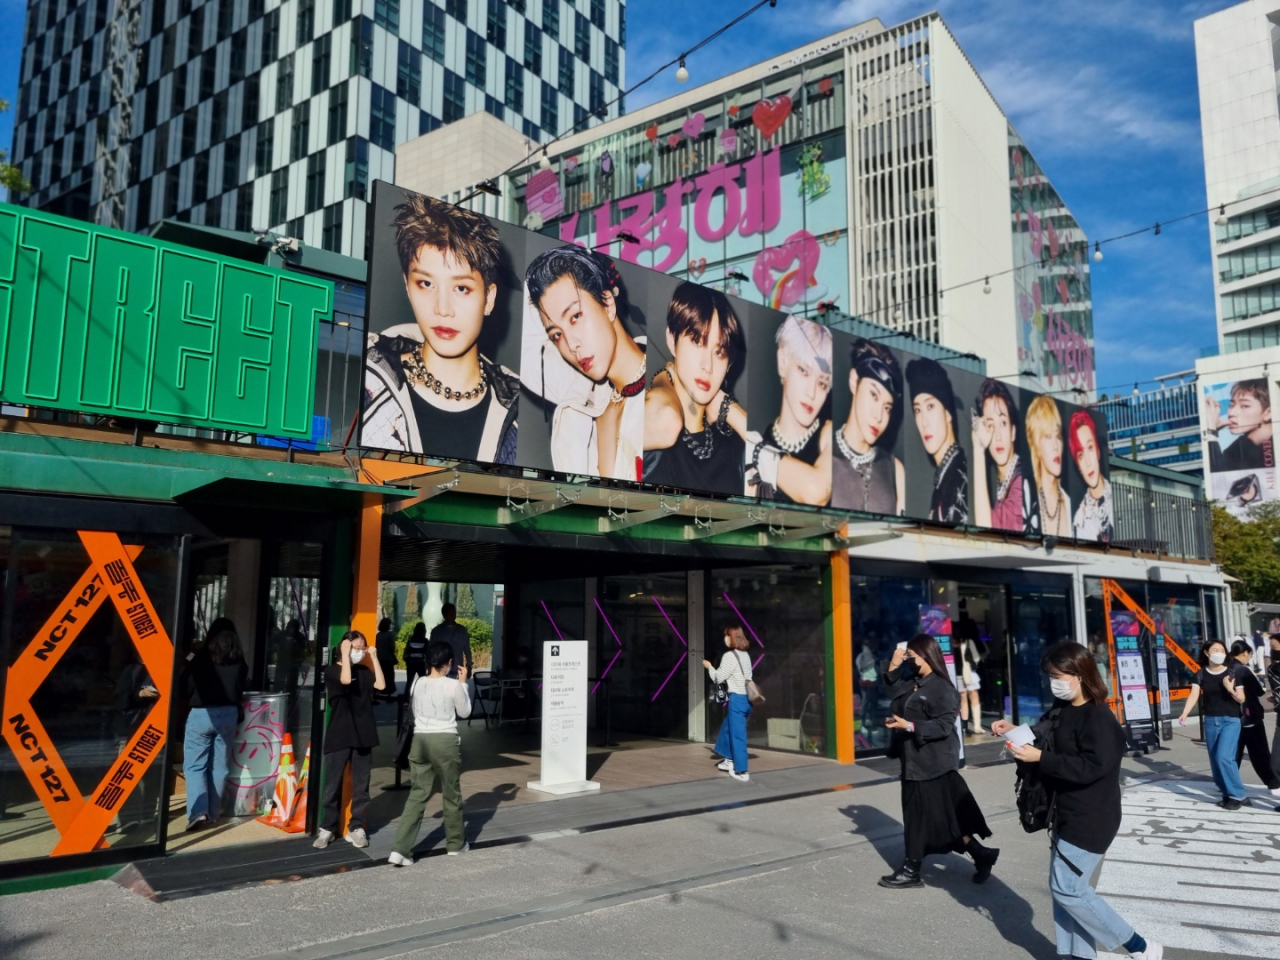 Fans gather to visit a pop-up store promoting boy band NCT 127’s recent release at Under Stand Avenue, in Seongsu, Seongdong-gu, Seoul. (Park Han-na/ The Korea Herald)